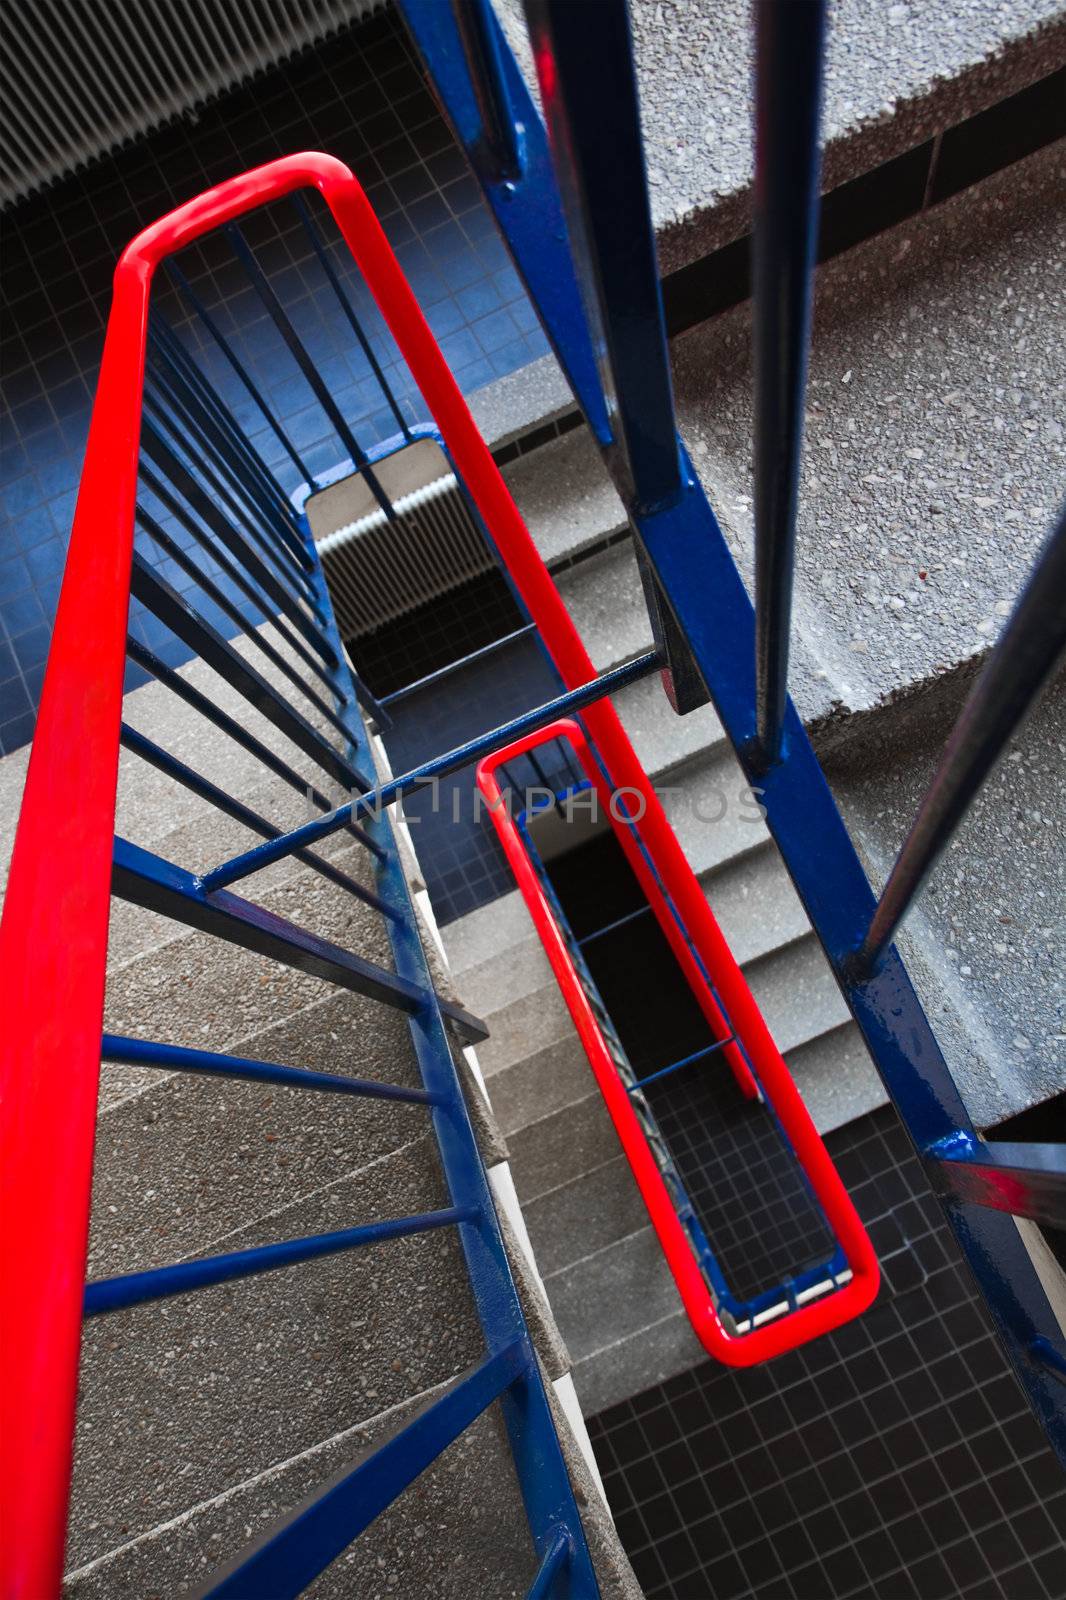 Staircase in building with red and blue colors